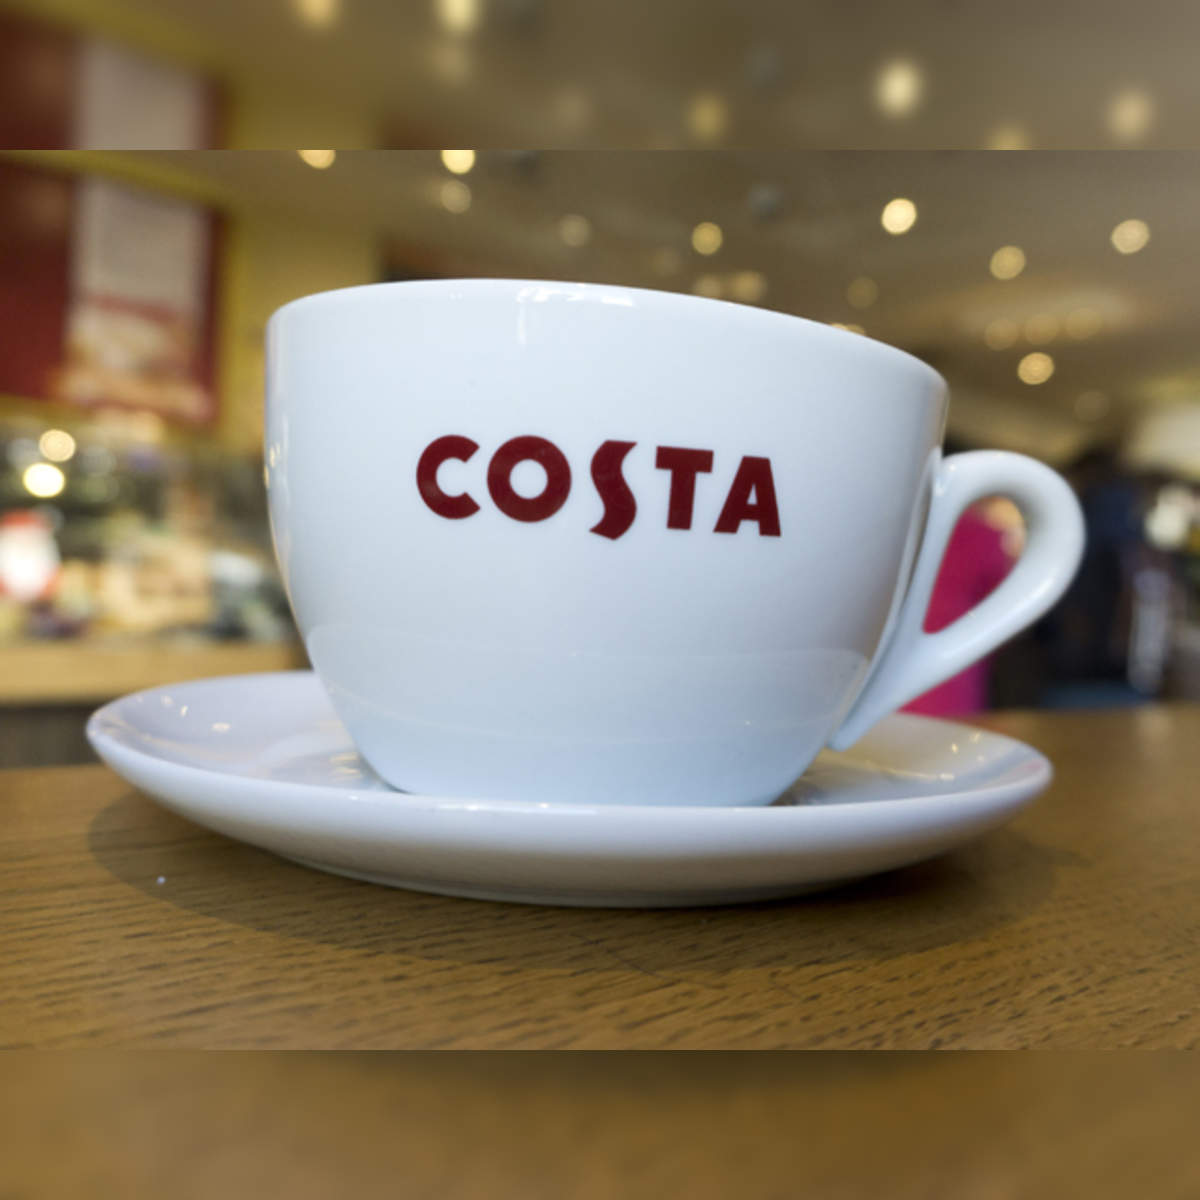 Coke brews an instant coffee rivalry with $5.1 billion Costa buy - The